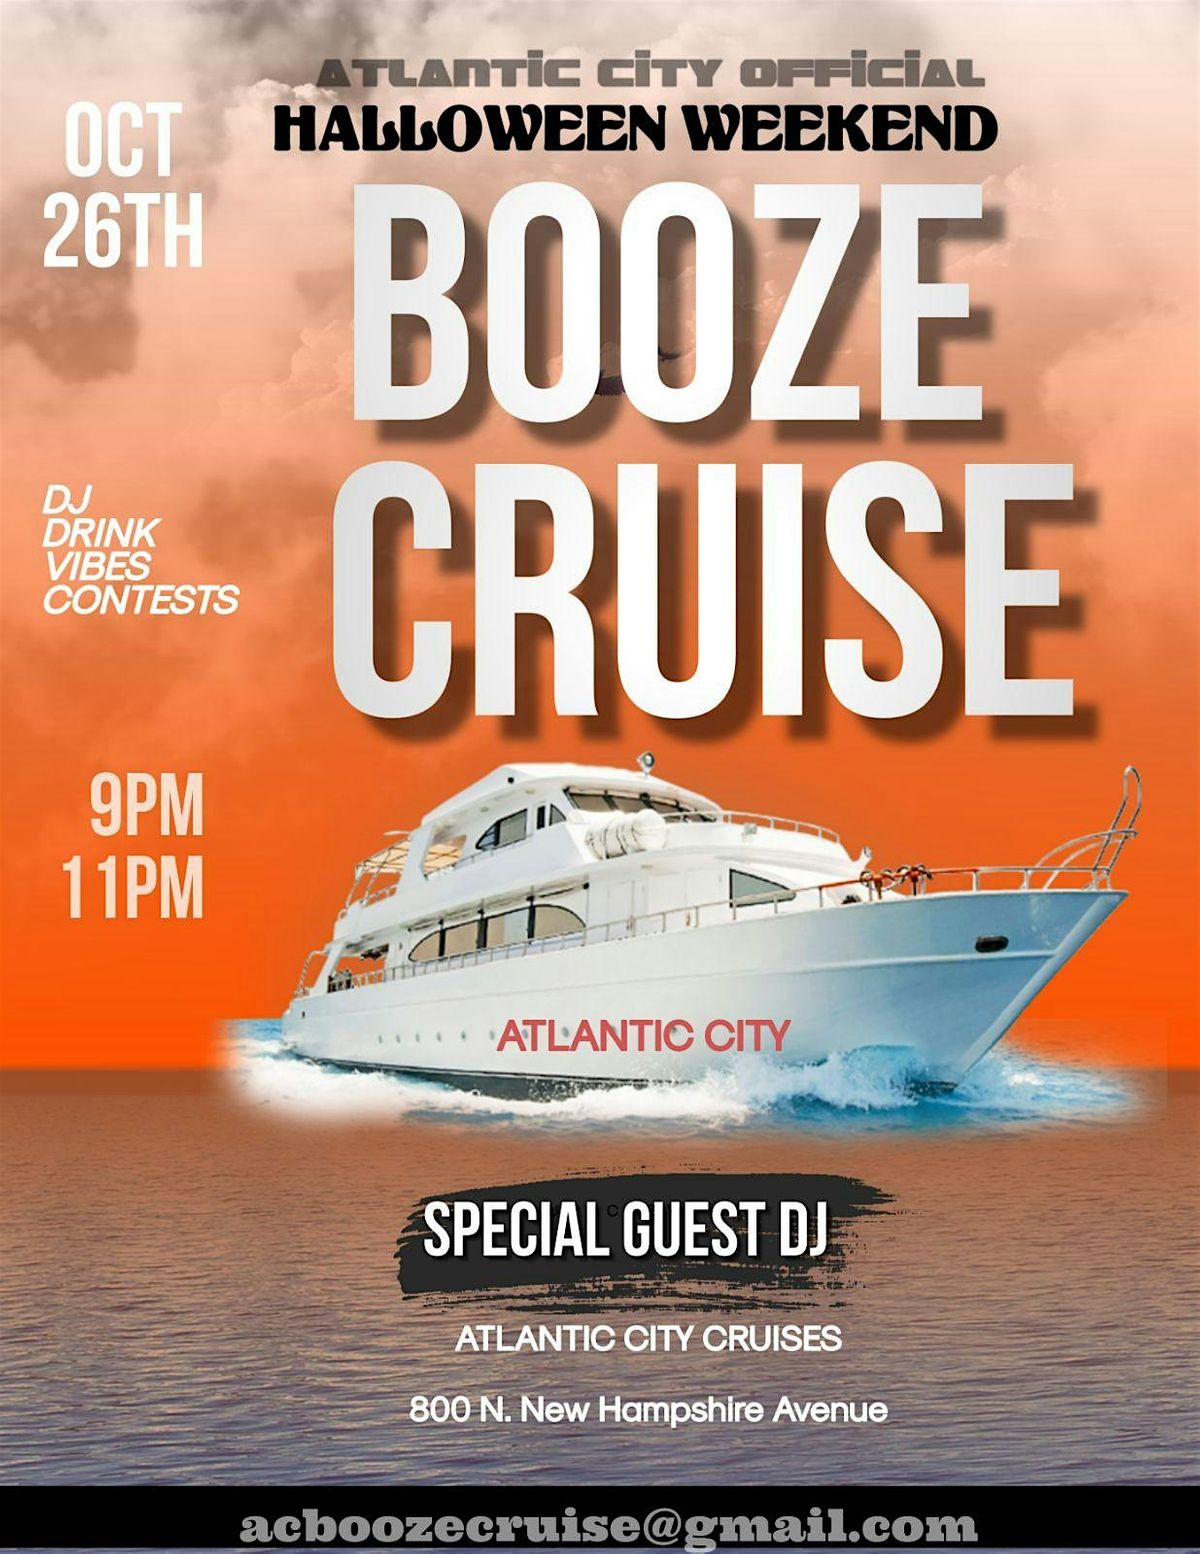 Booze Cruise The Official Halloween Party - Atlantic City